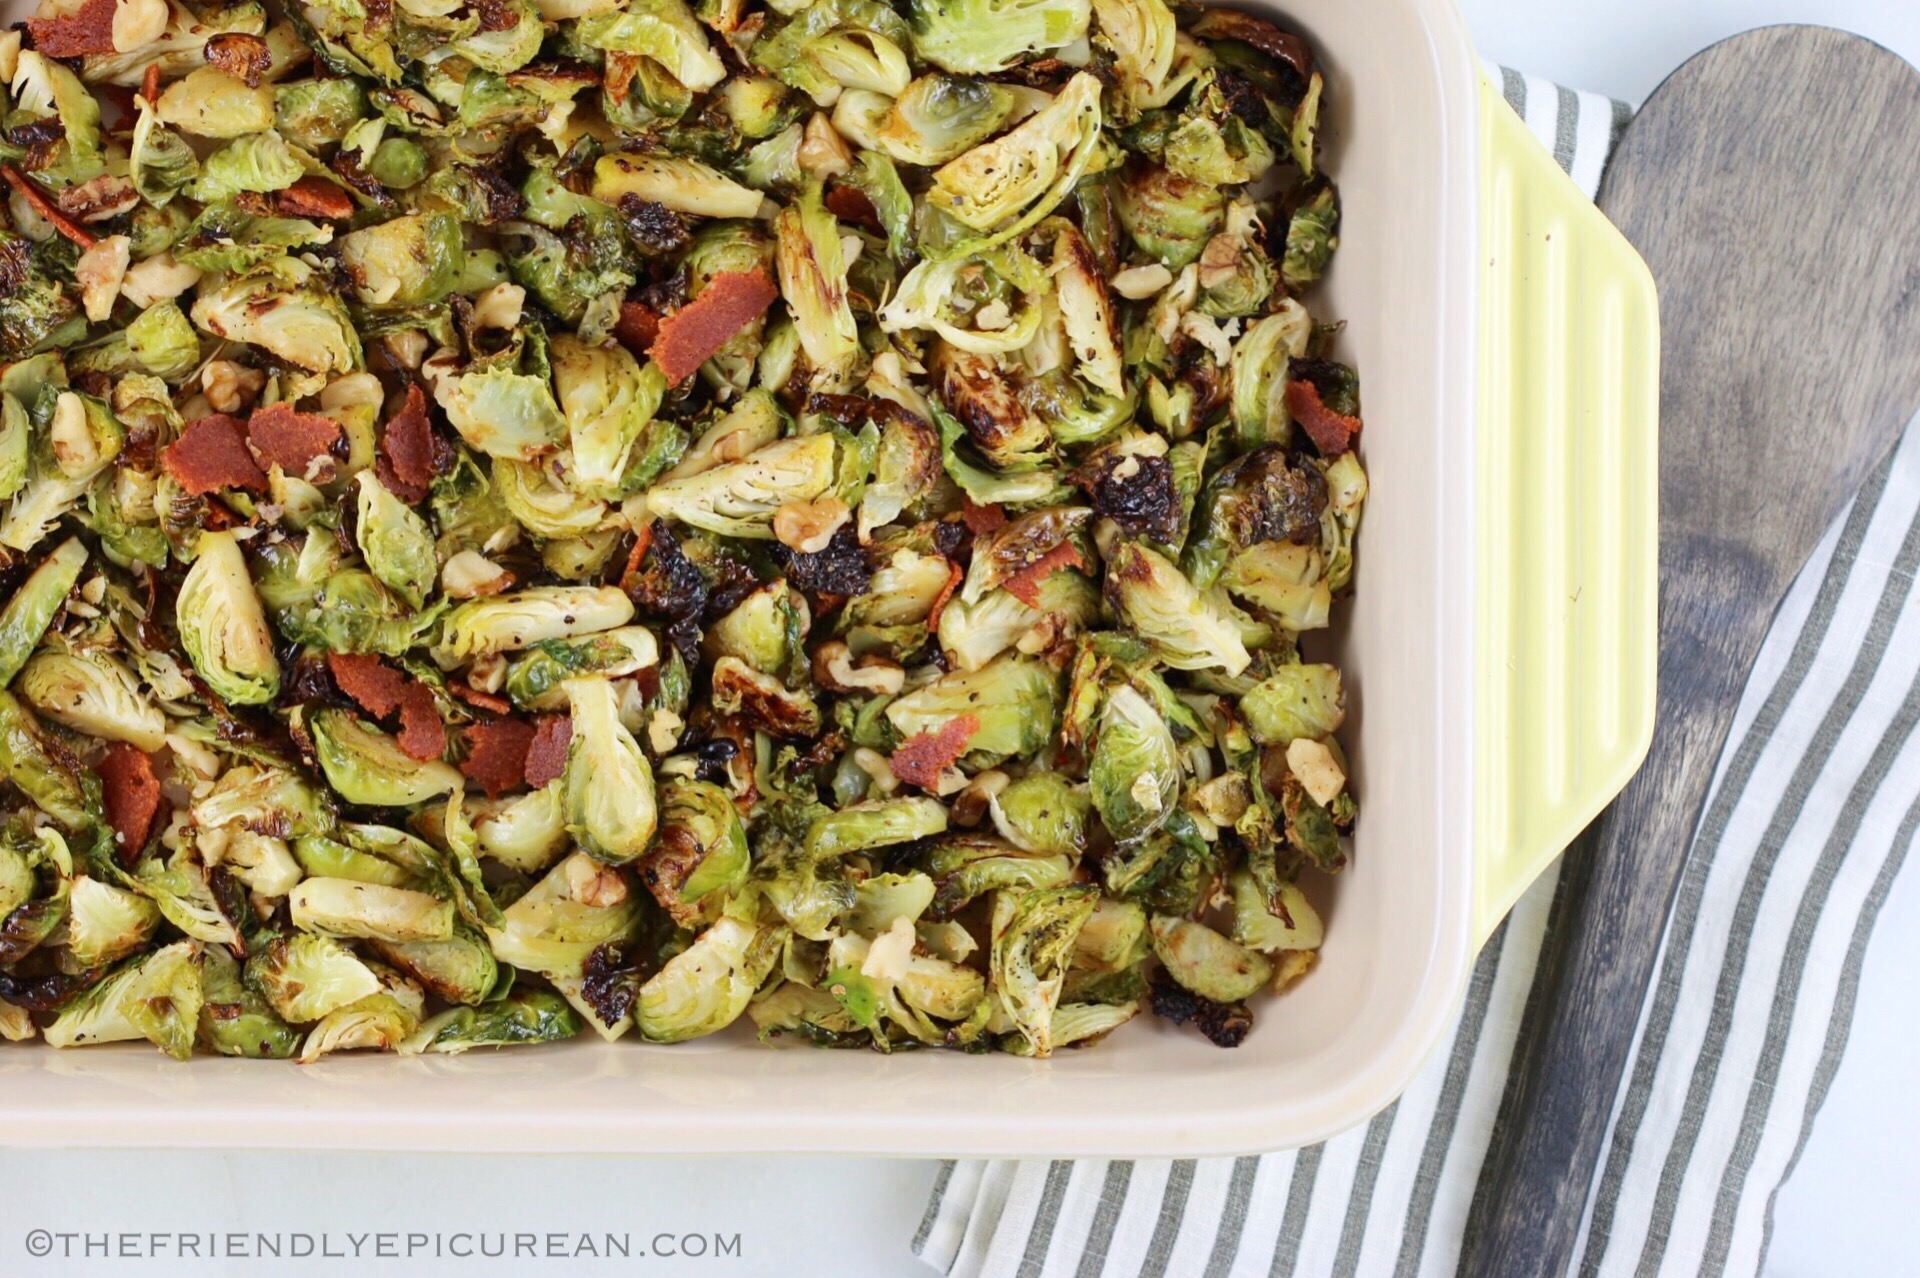 Roasted Brussel Sprouts with Walnuts and Vegan Bacon